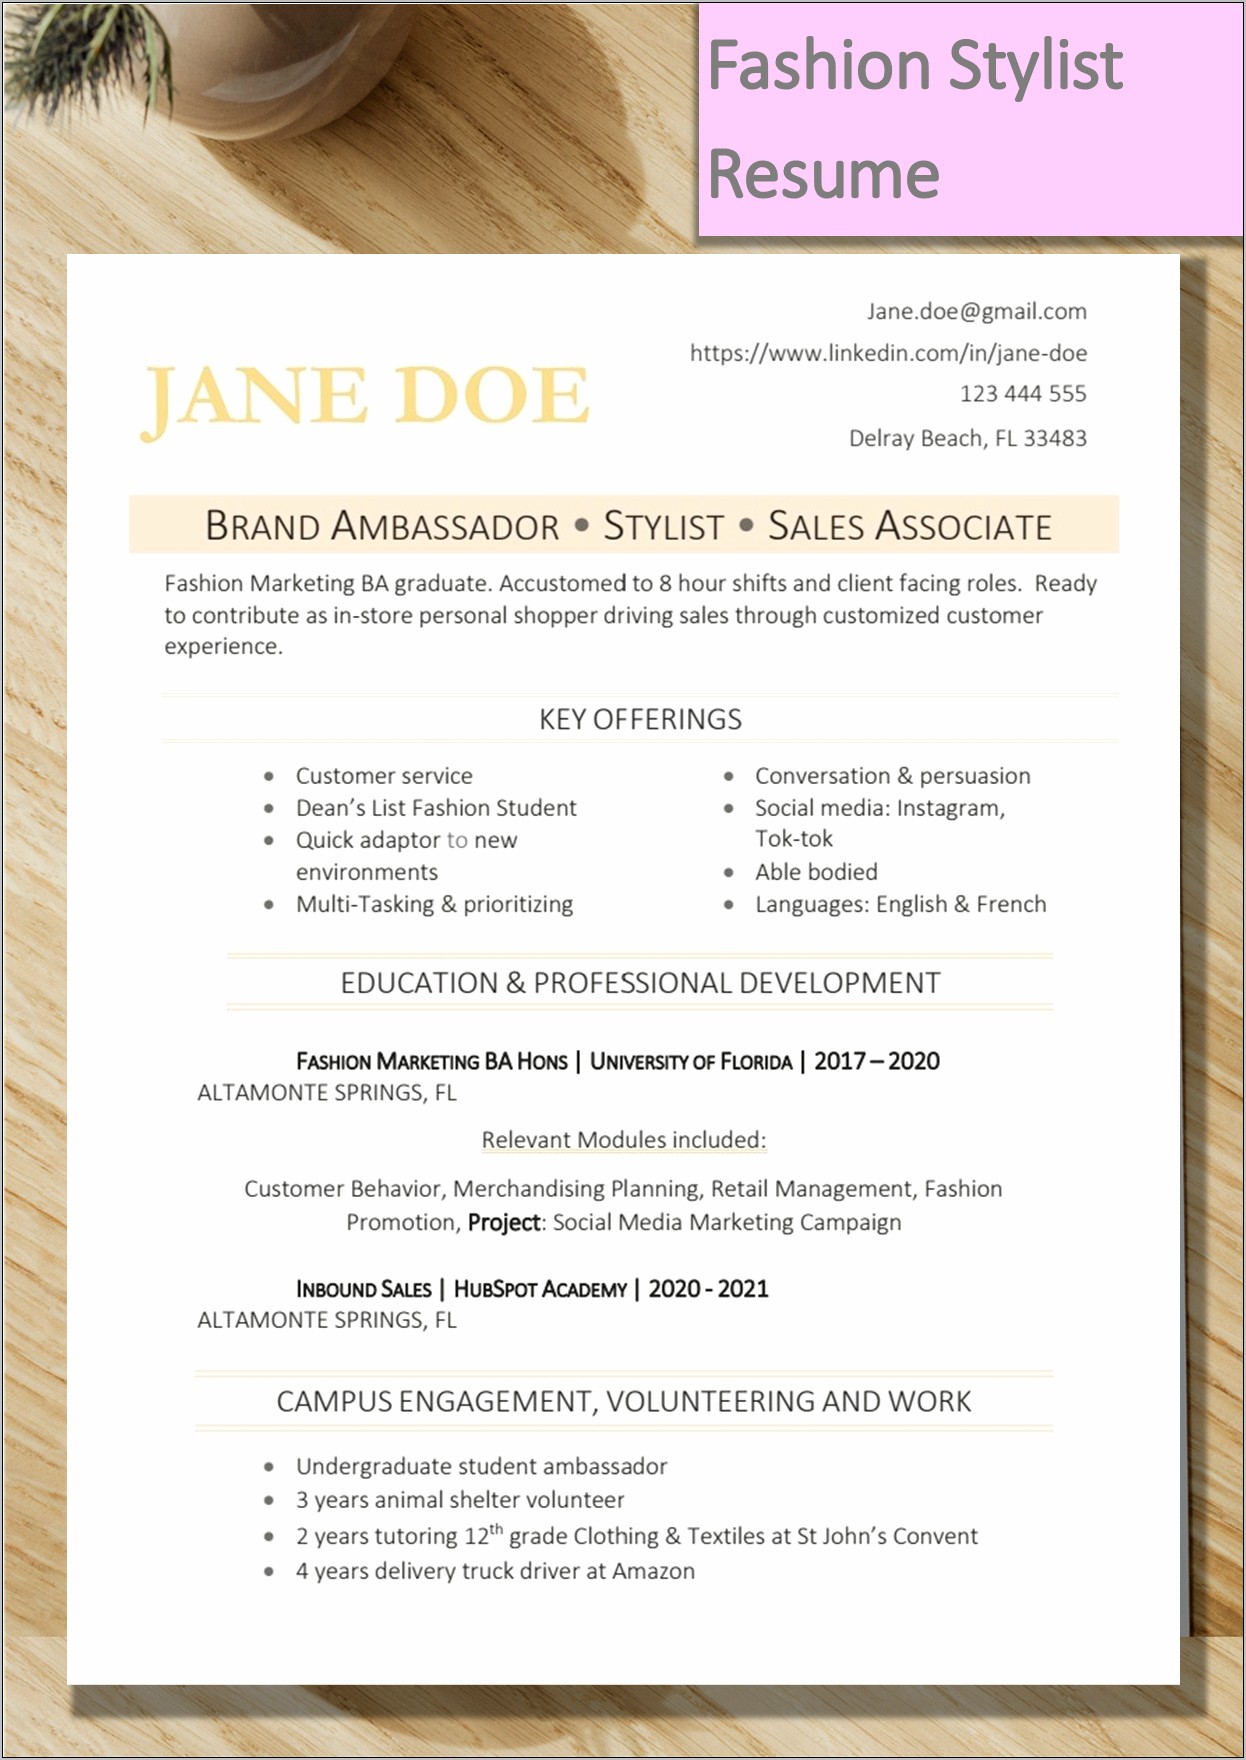 Resume Objective About Apparel Merchandising